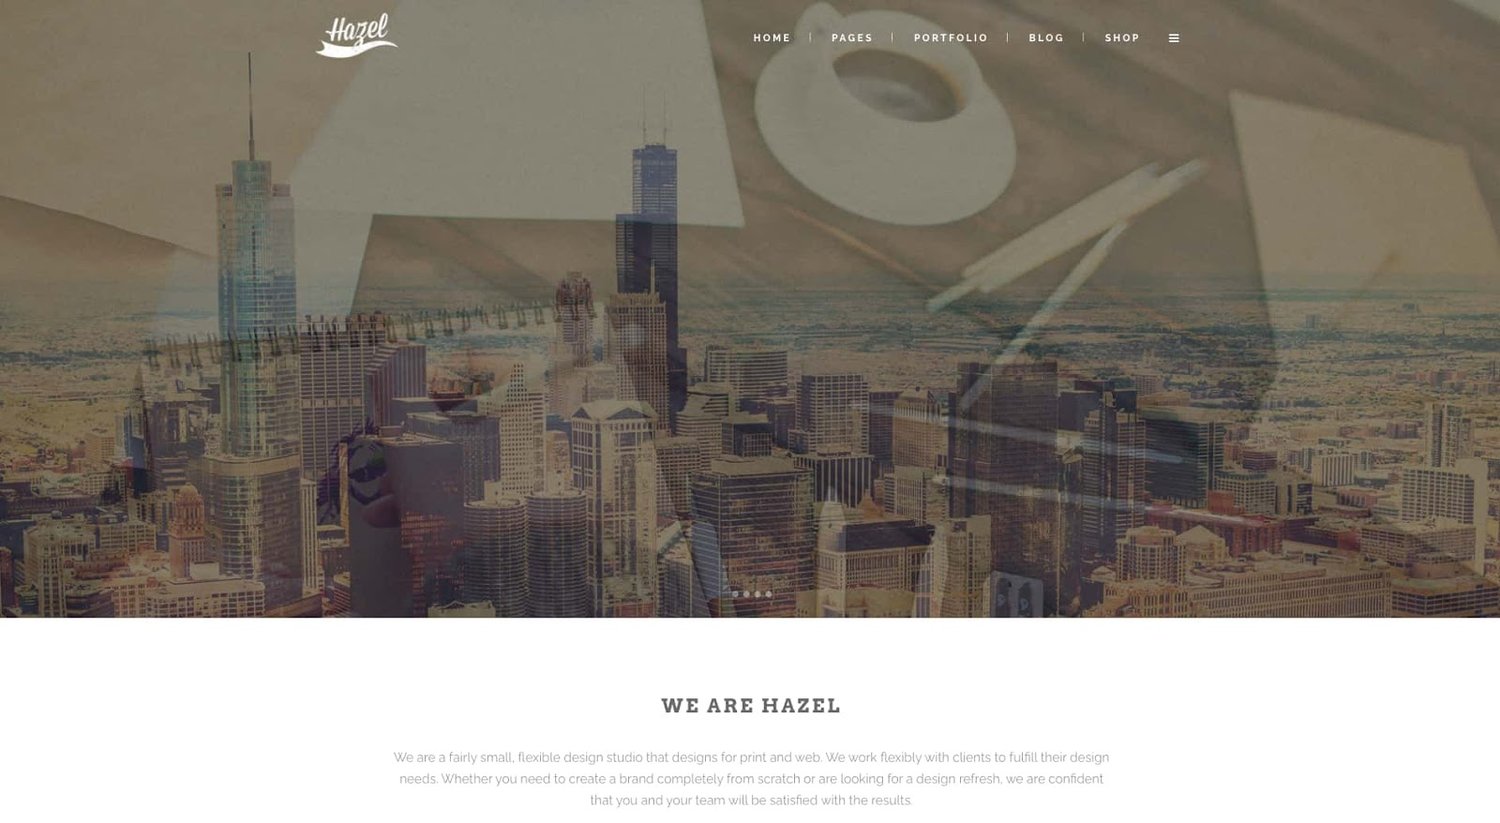 demo page for the wordpress theme with visual composer Hazel